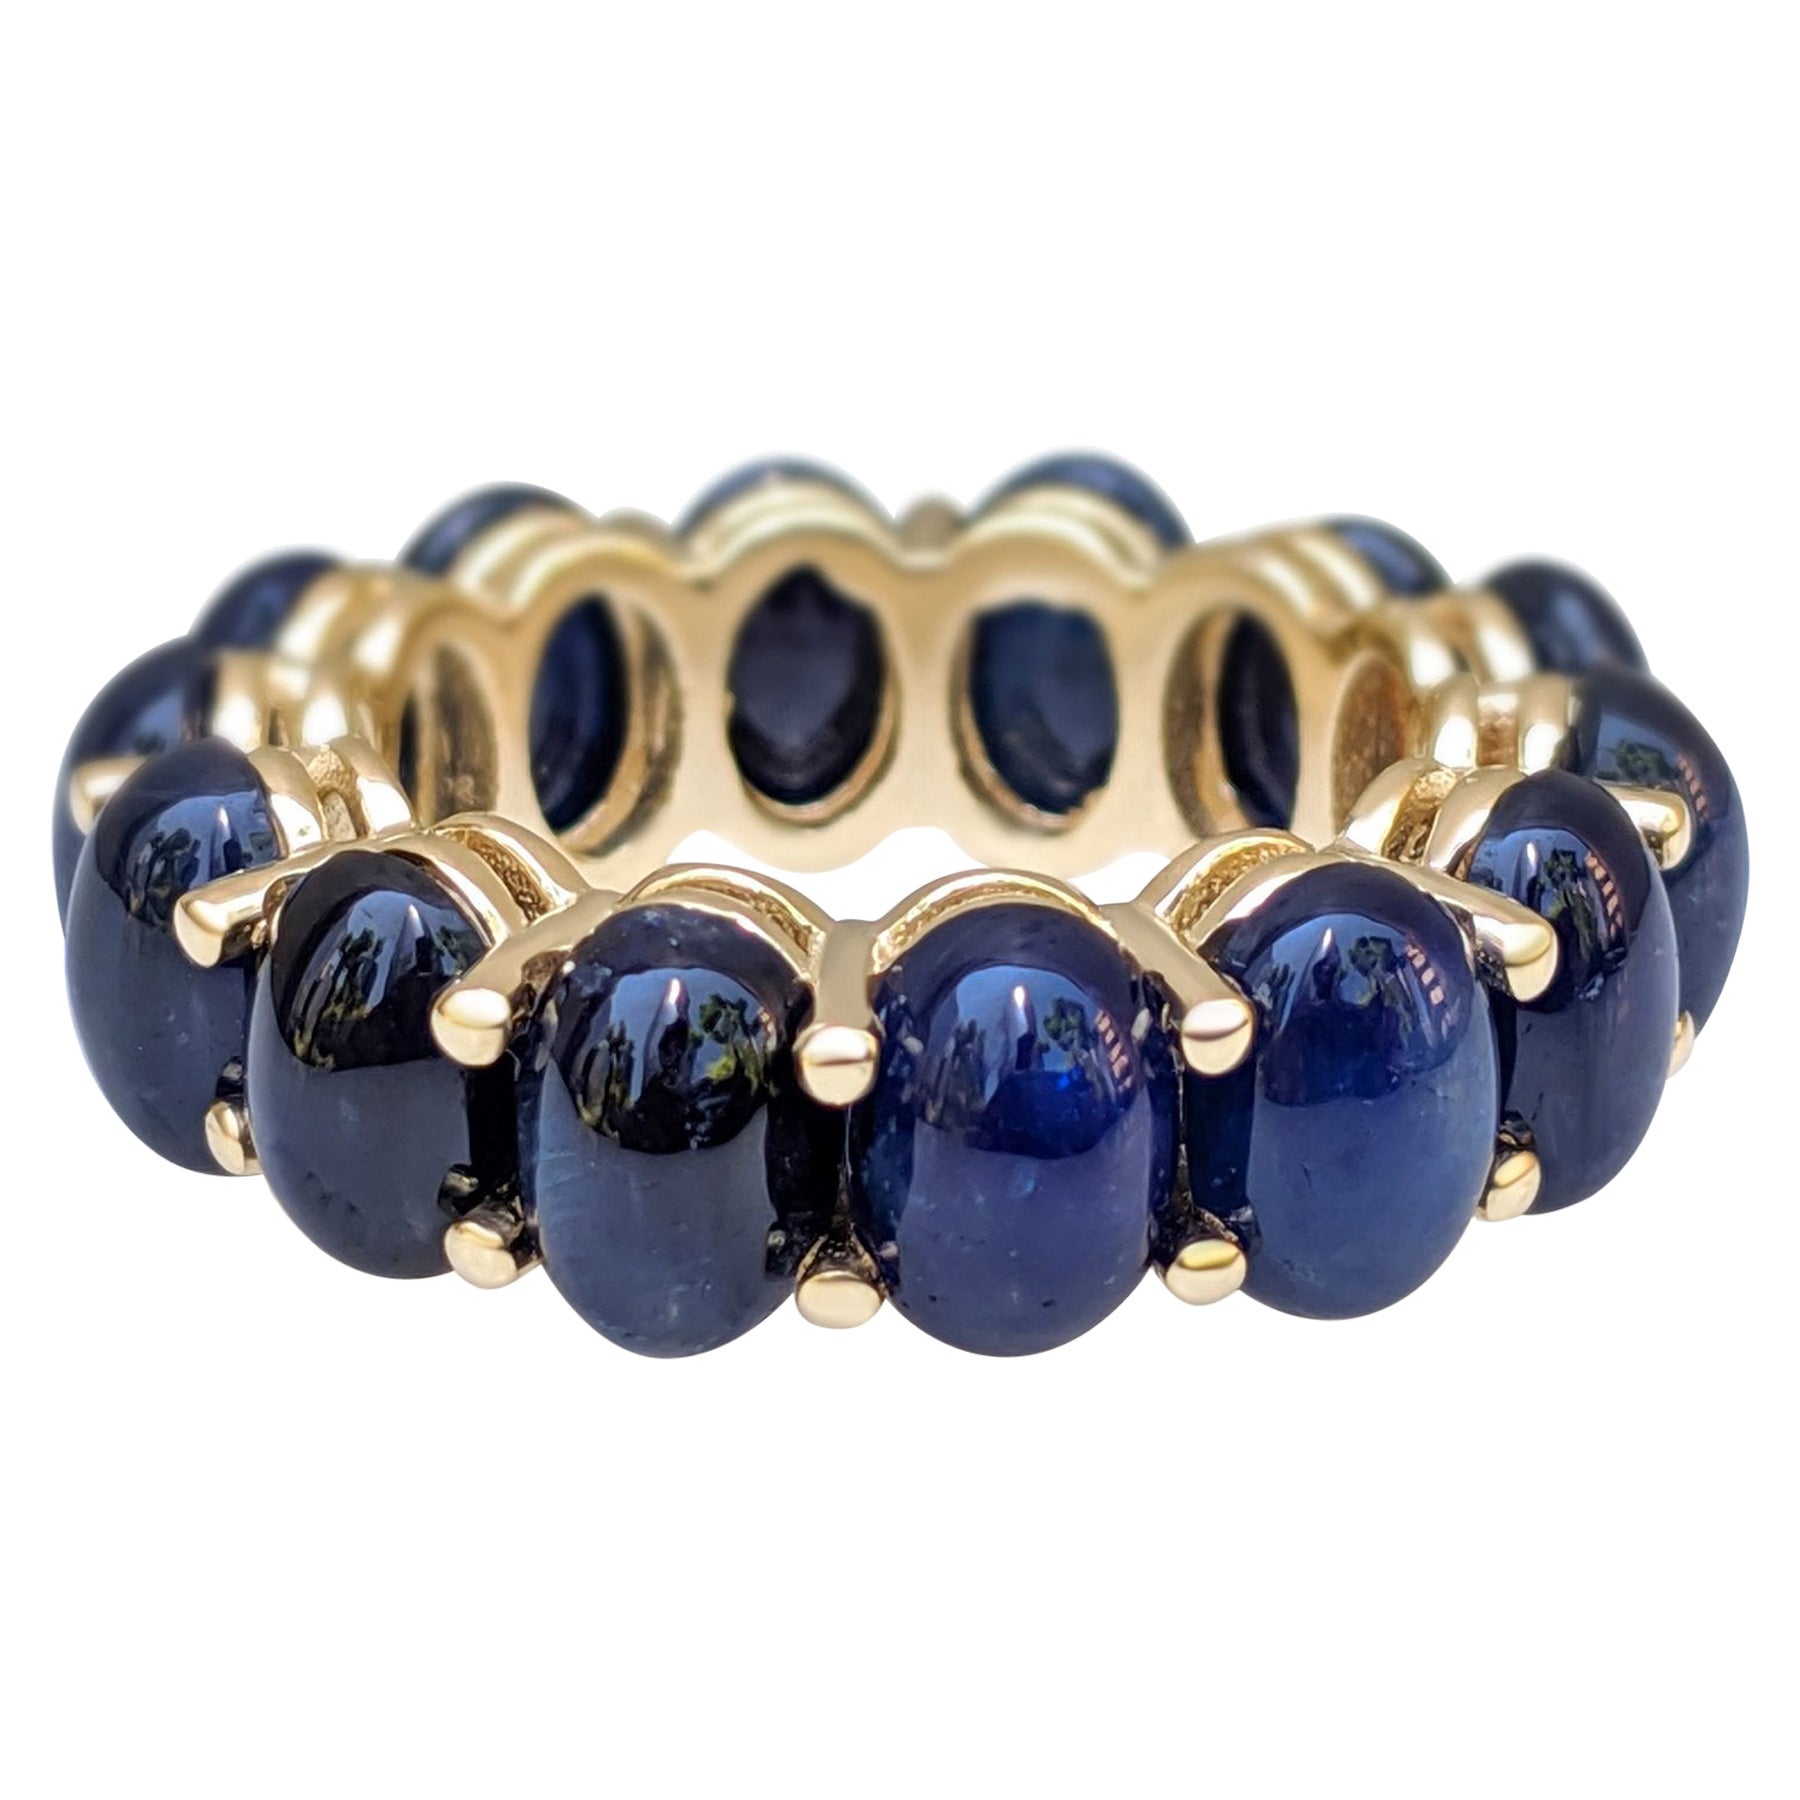 NO RESERVE! 13.07 Carat Sapphire Eternity Band - 14 kt. Yellow Gold - Ring For Sale